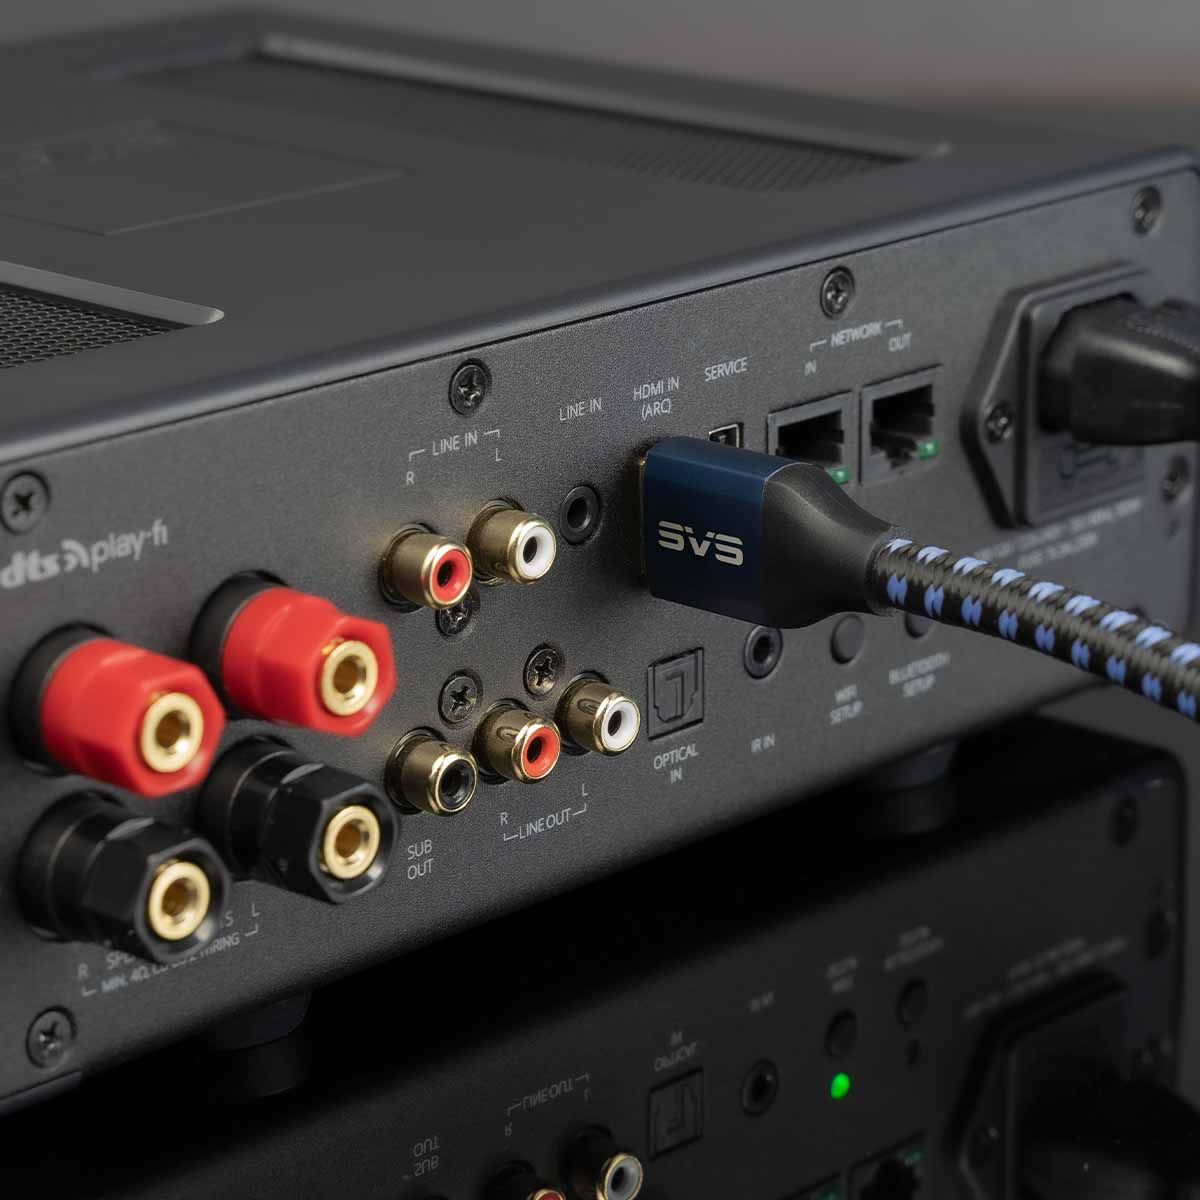 SVS SoundPath Ultra HDMI Cable - plugged into receiver